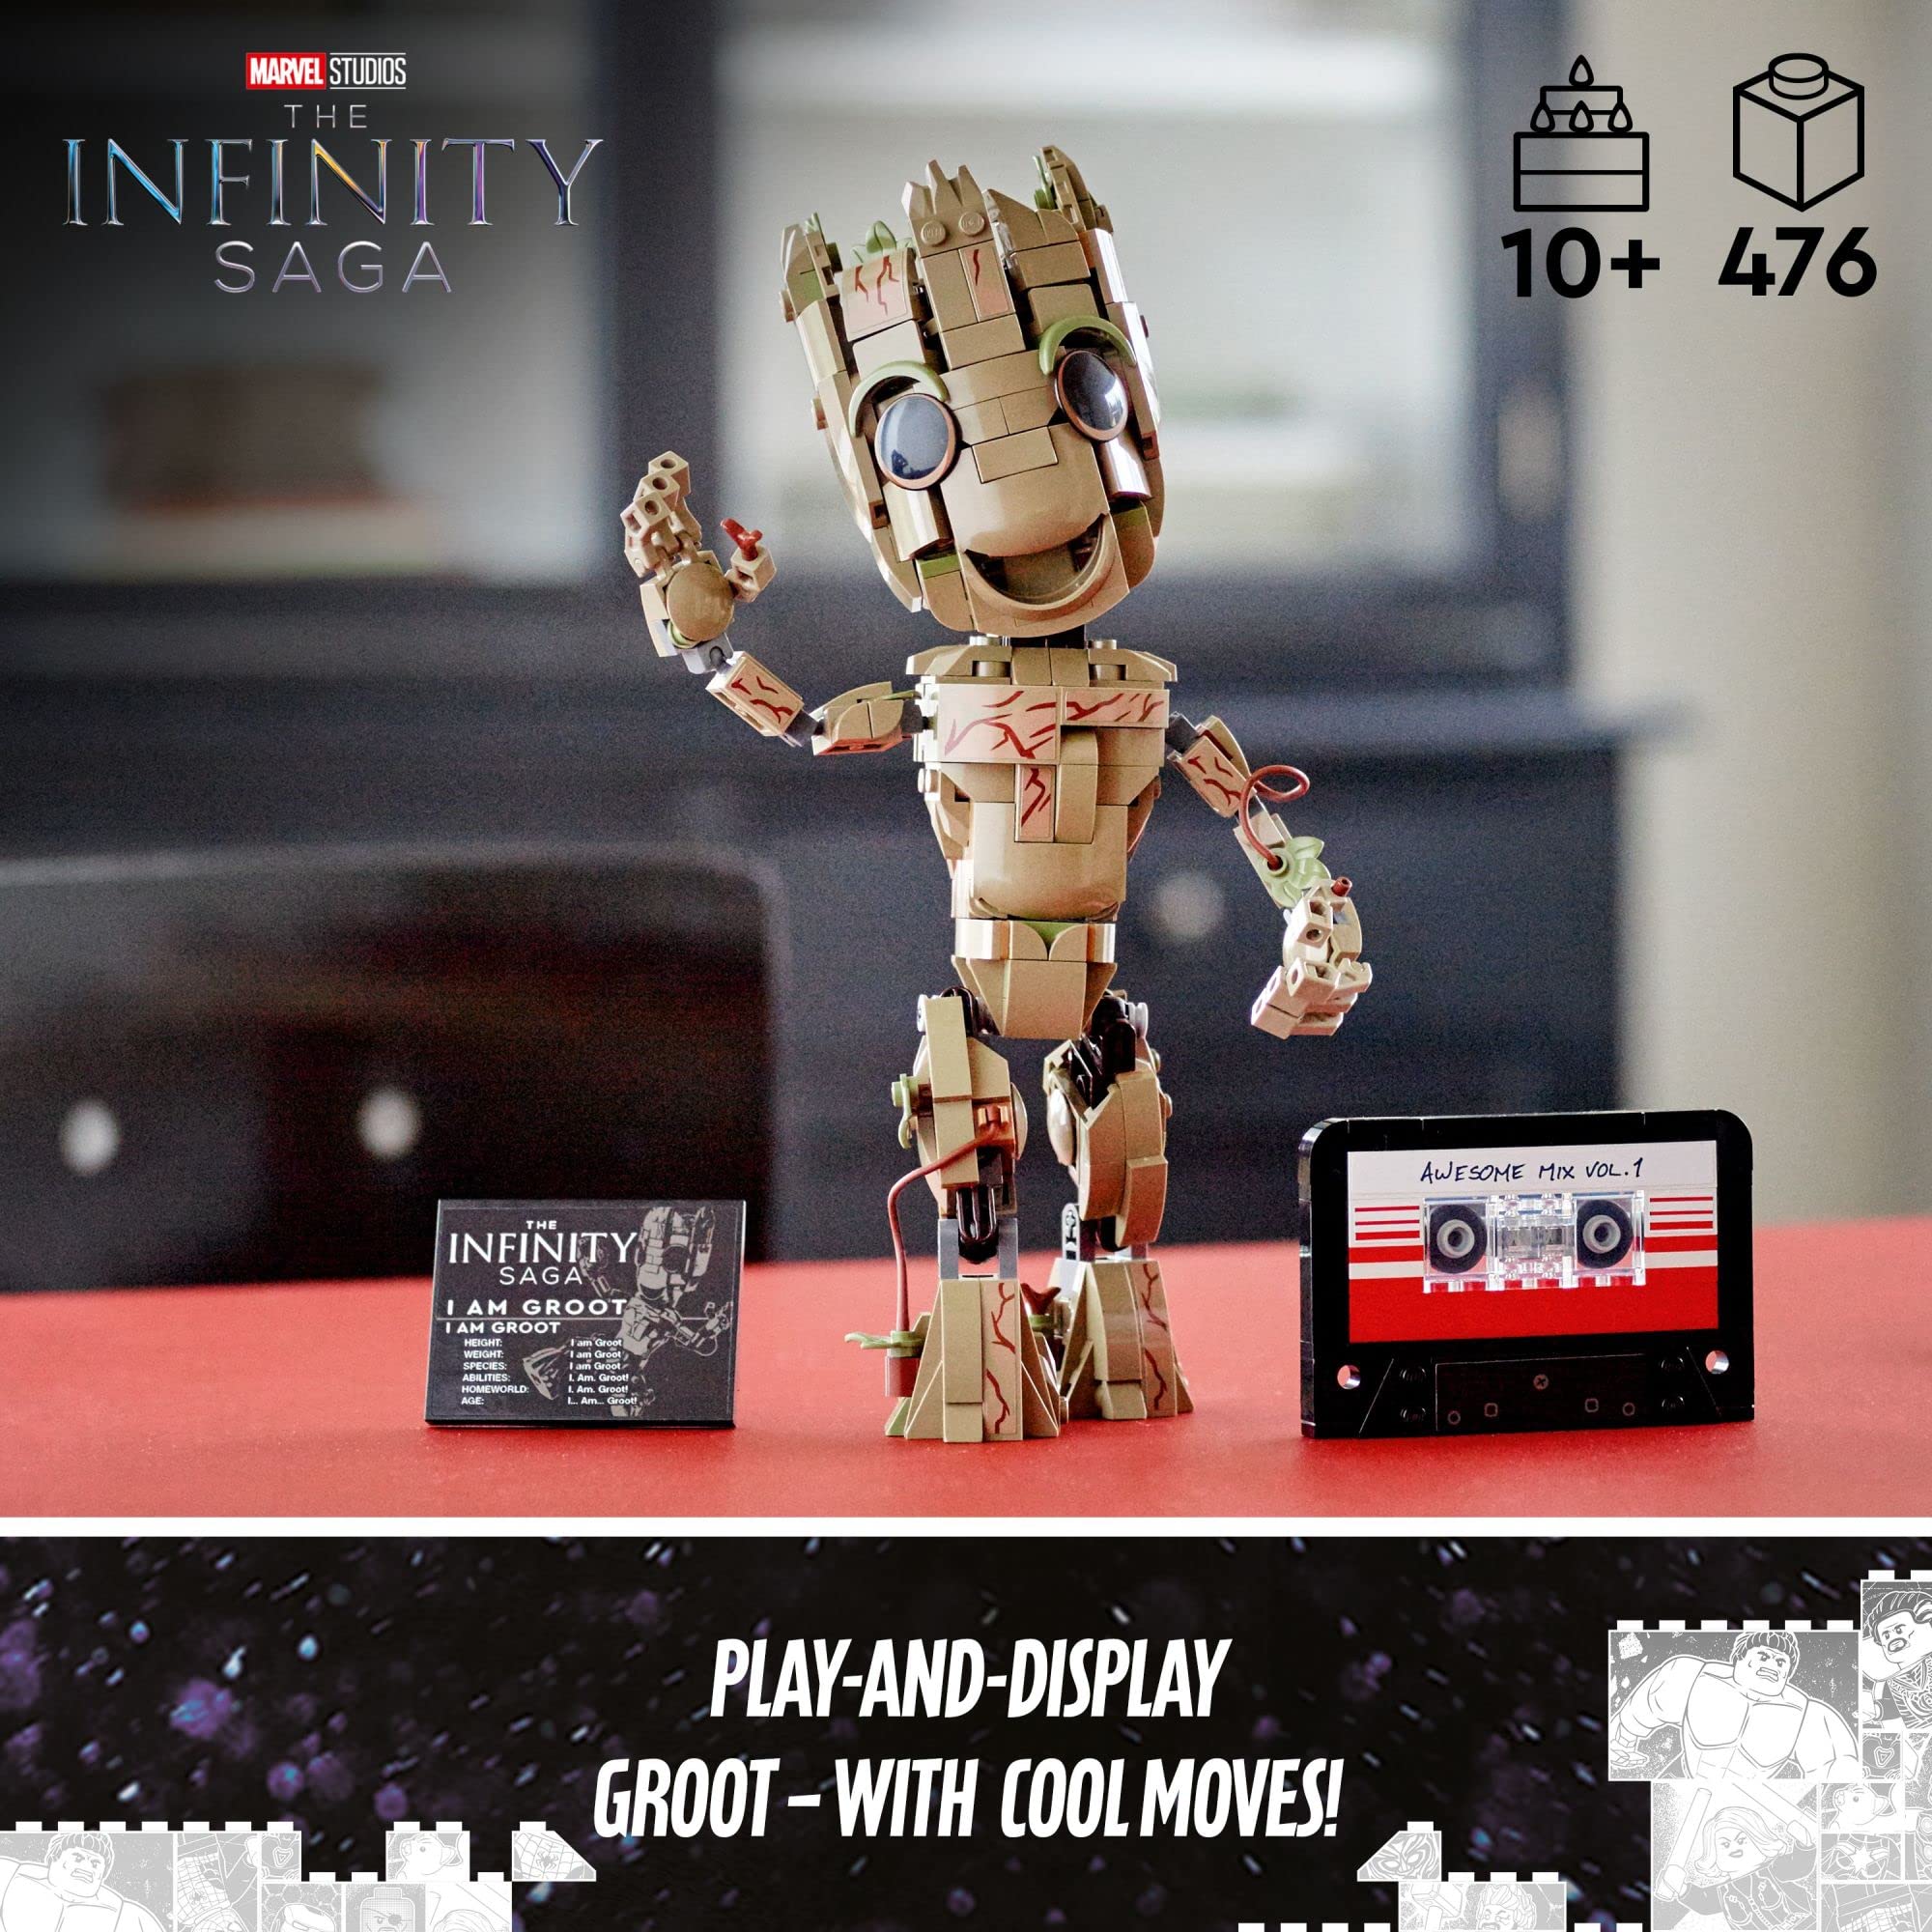 LEGO Marvel I am Groot 76217 Building Toy Set - Action Figure from The Guardians of The Galaxy Movies, Baby Groot Model for Play and Display, Great for Kids, Boys, Girls, and Avengers Fans Ages 10+